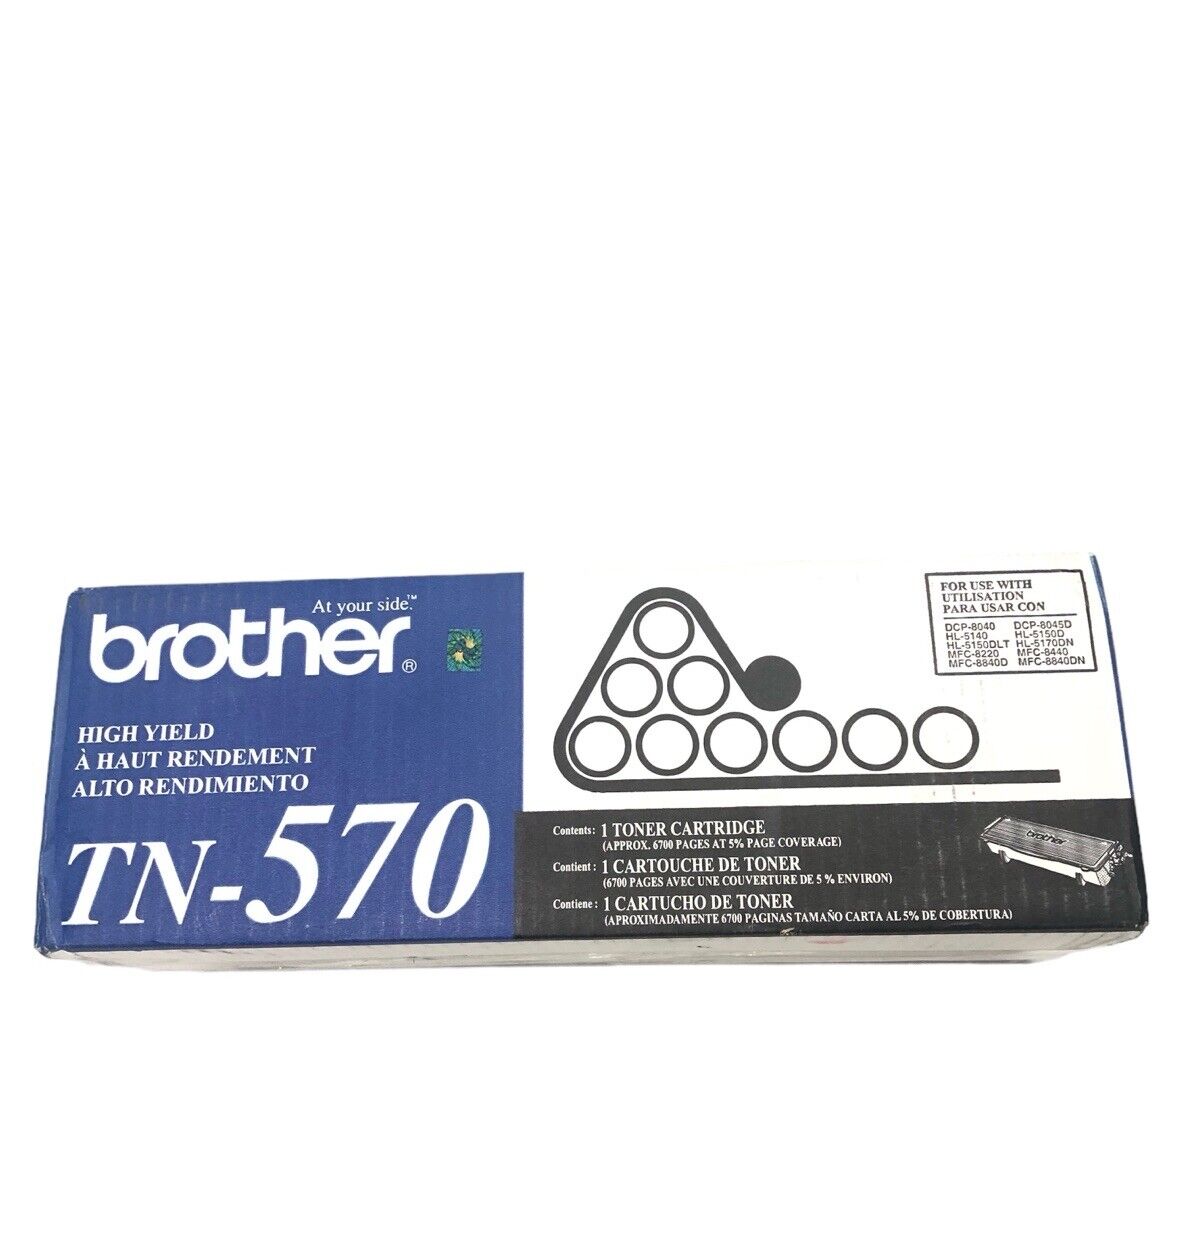 GENUINE BROTHER TN-570 Toner Cartridge Black For DCP-8040 DCP-8045D NEW SEALED .